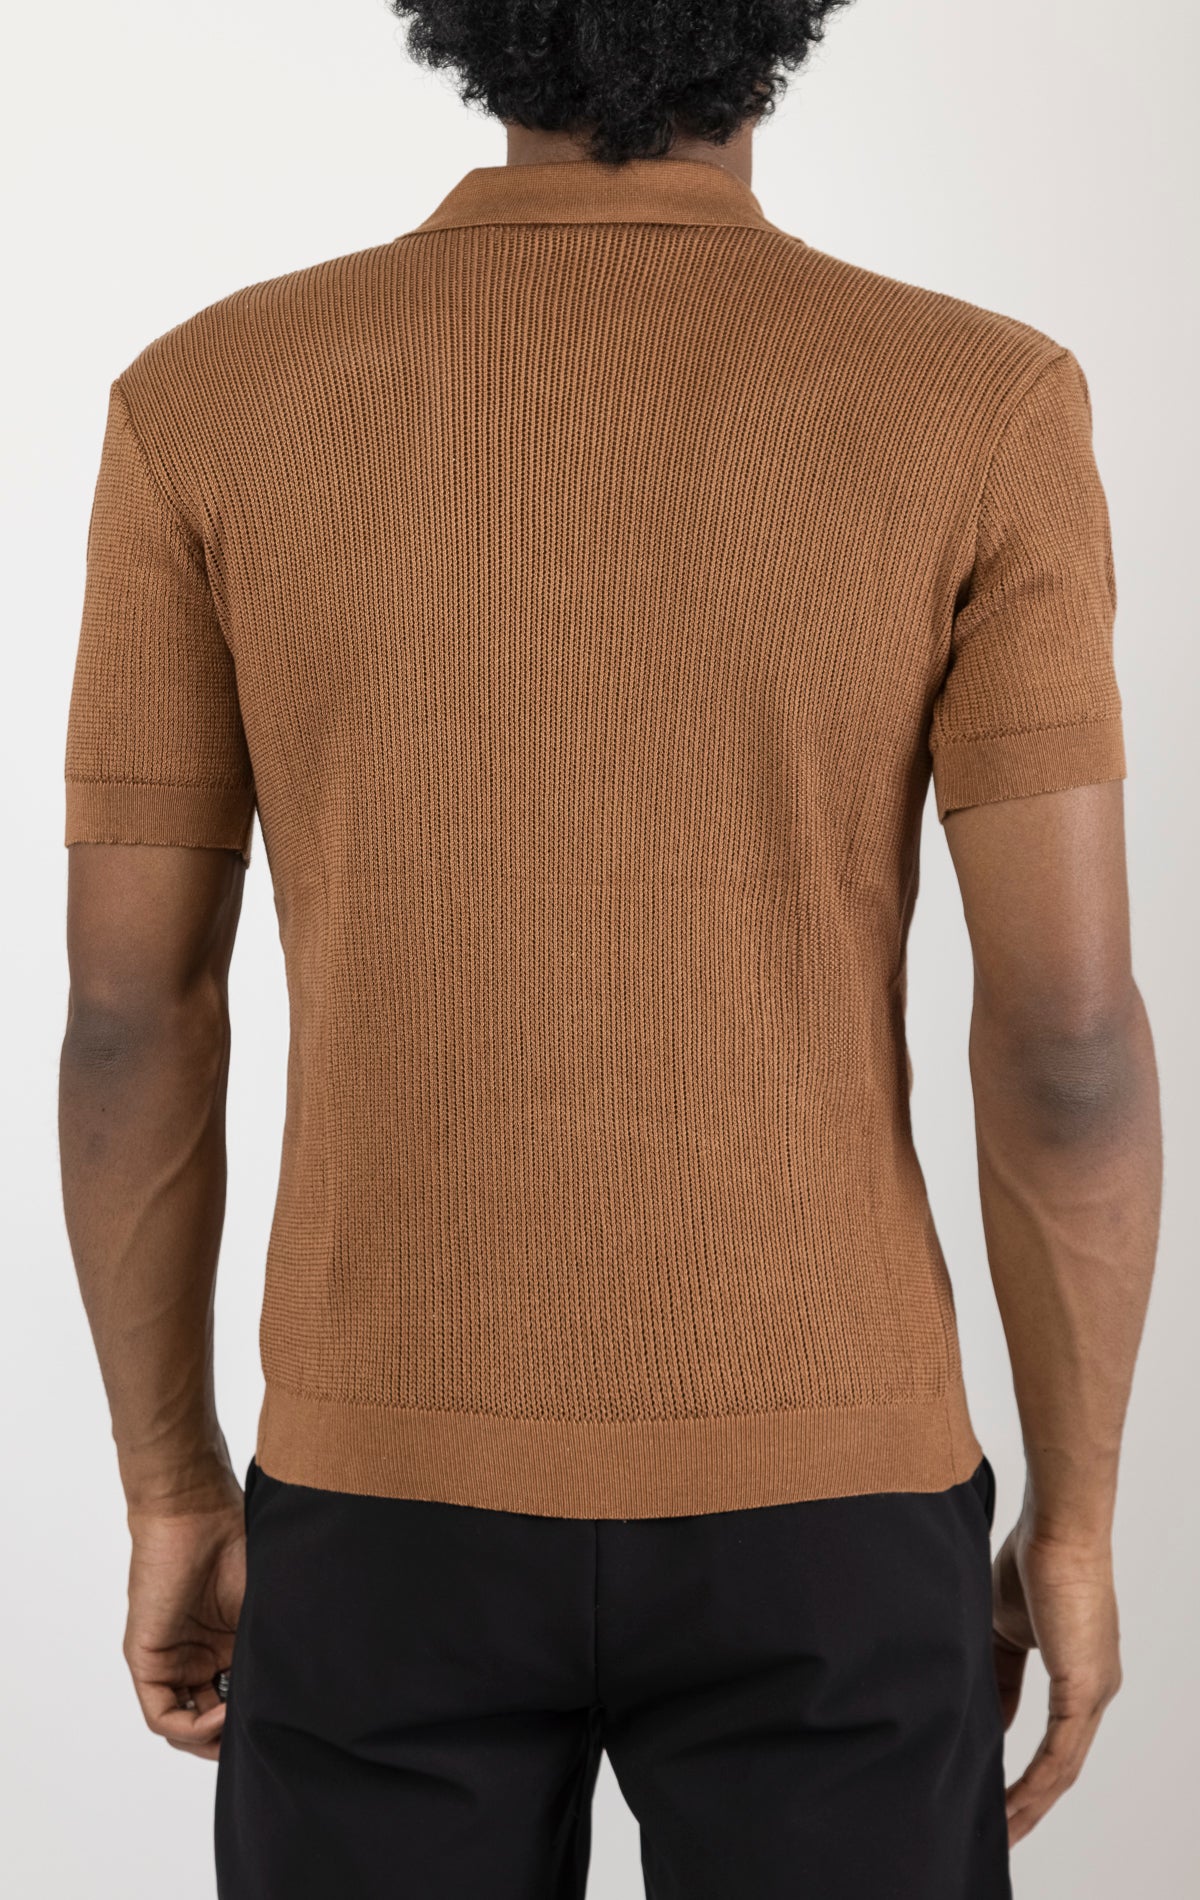 Men's see-through button-down mesh top in brown. The top is made from a 50% cotton, 50% acrylic blend and features a tailored fit with a sheer mesh fabric and button-down closure.